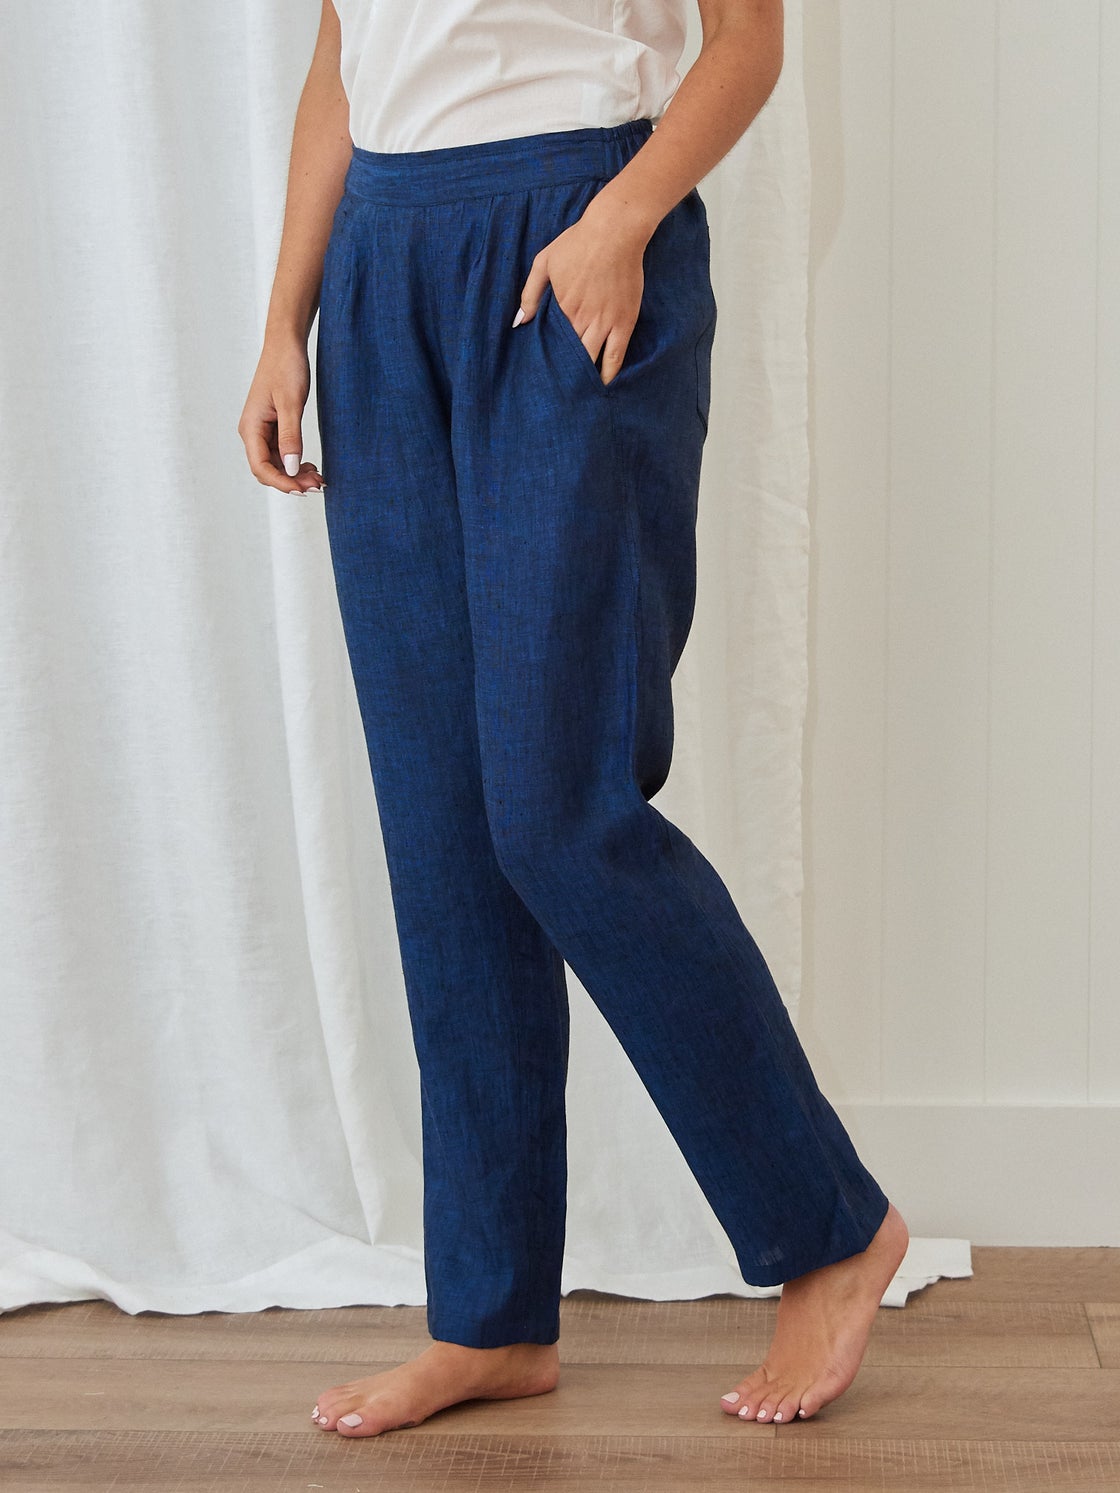 Voyager Linen Pants in Blue Chambray